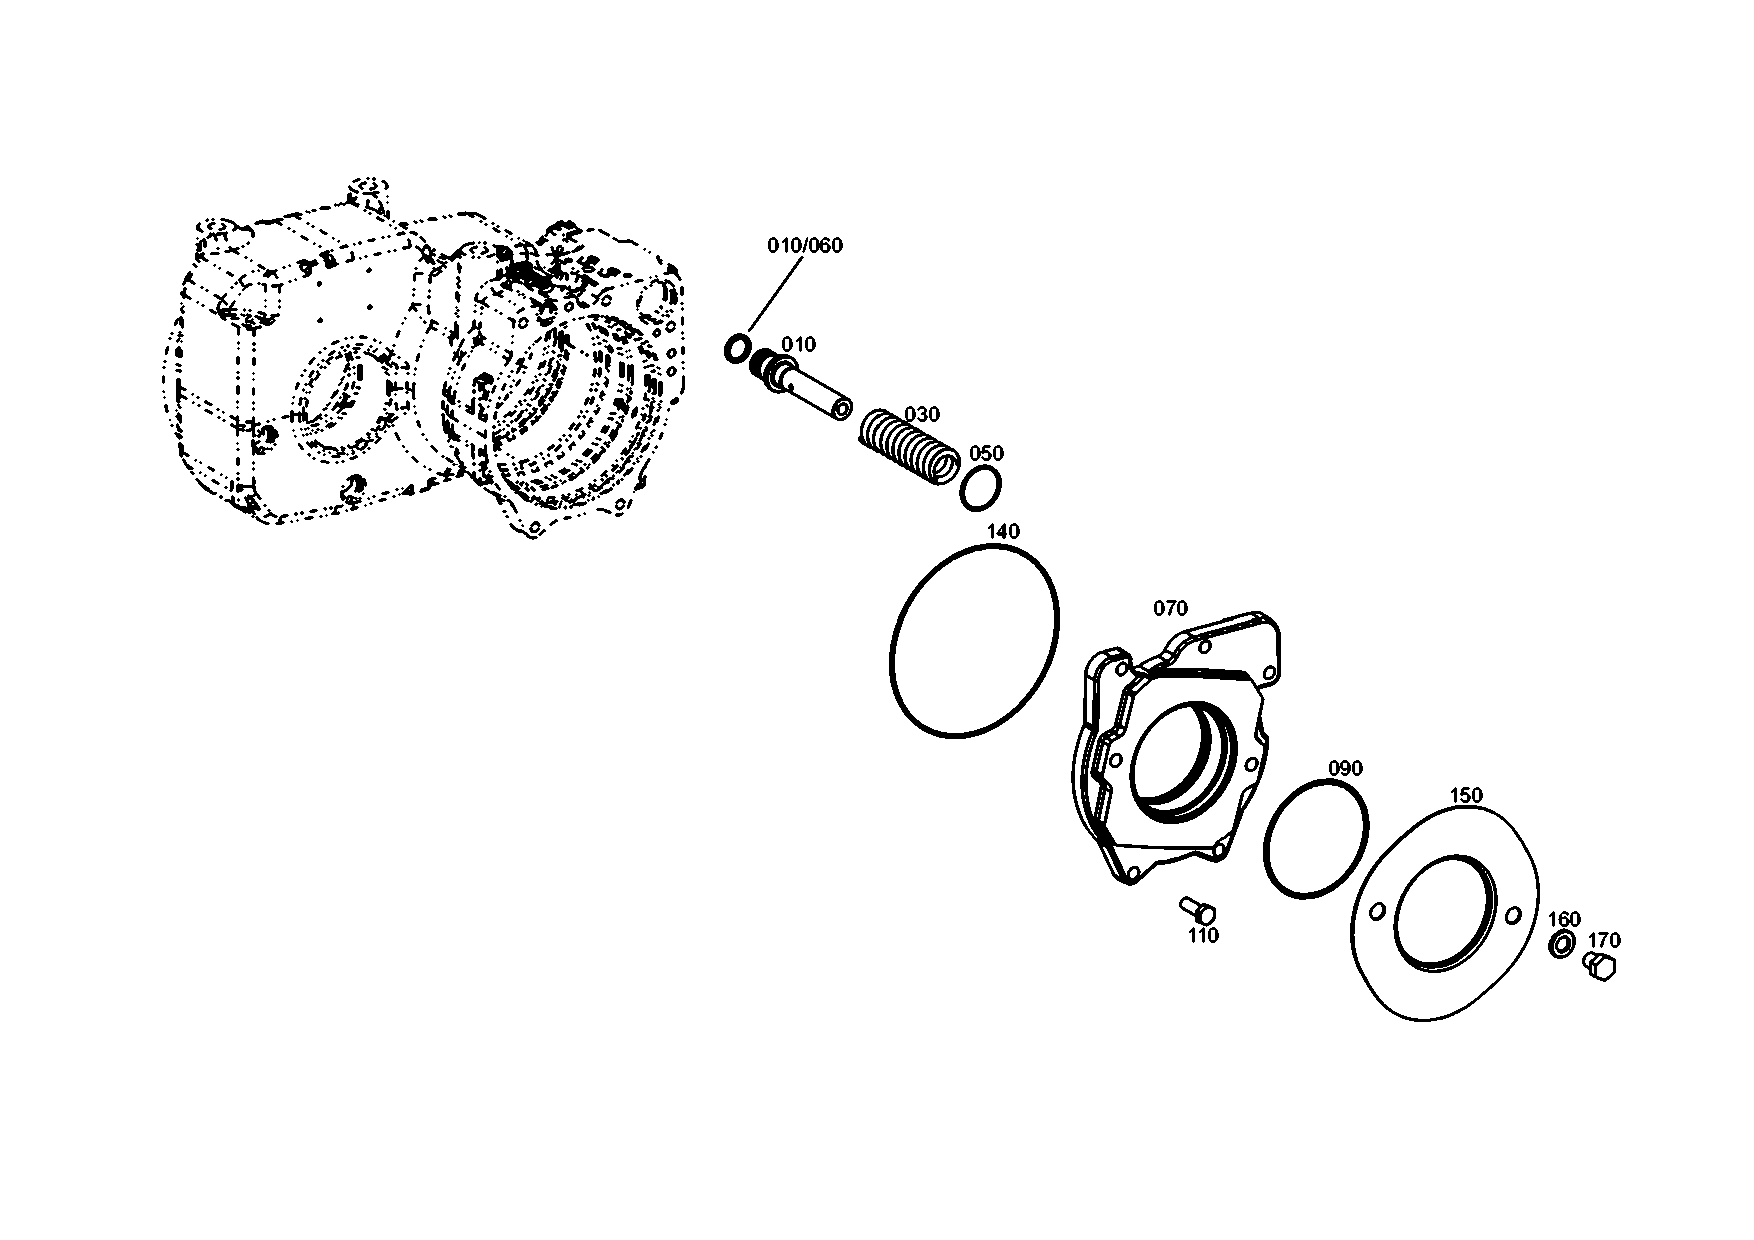 drawing for E. N. M. T. P. / CPG 4143 201 021 - PISTON (figure 5)